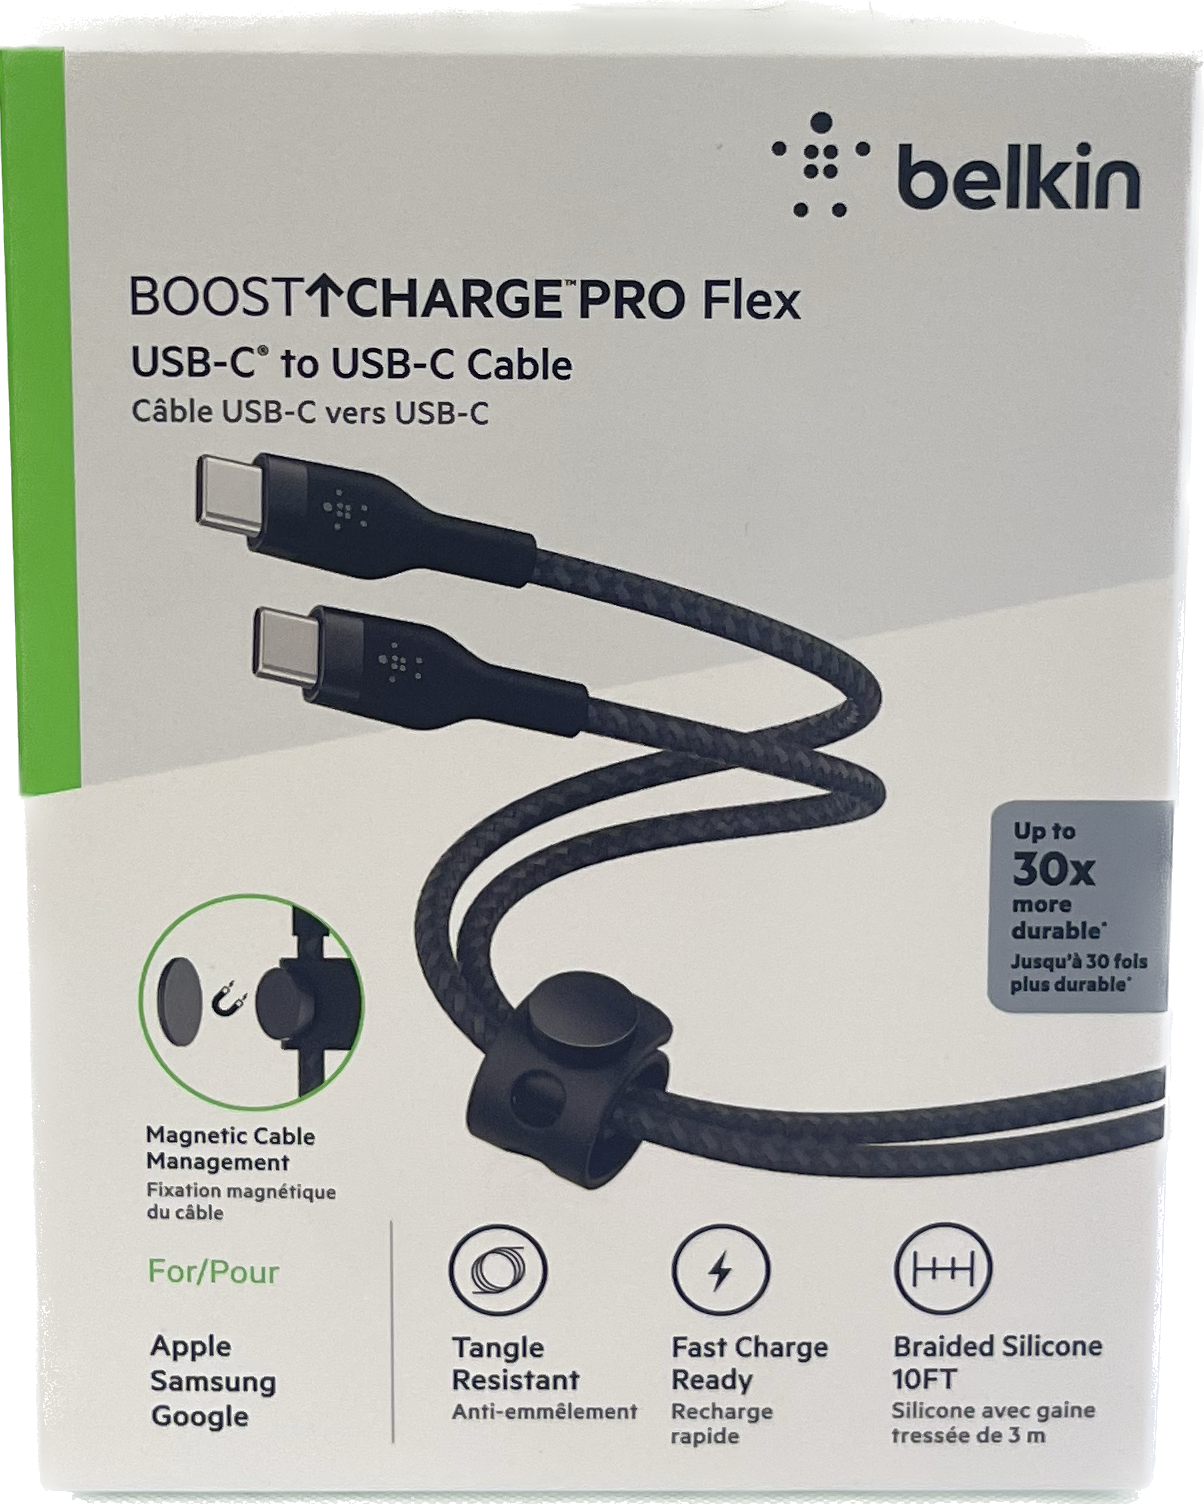 NEW Belkin BoostCharge Pro Flex USB-C To USB-C Data Charge Braided Cable 10FT